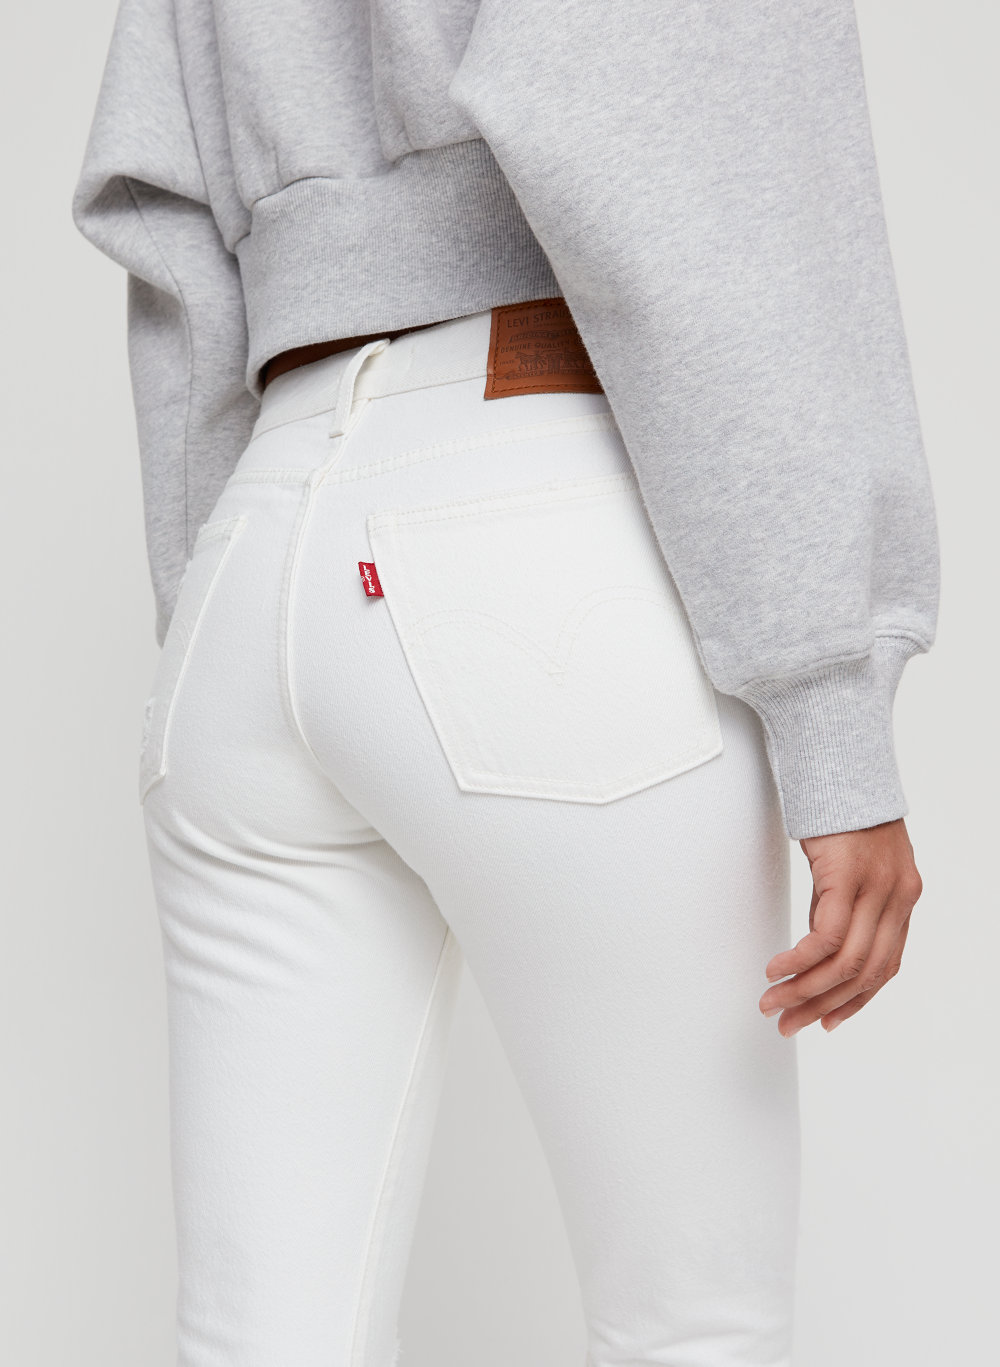 levi wedgie jeans white